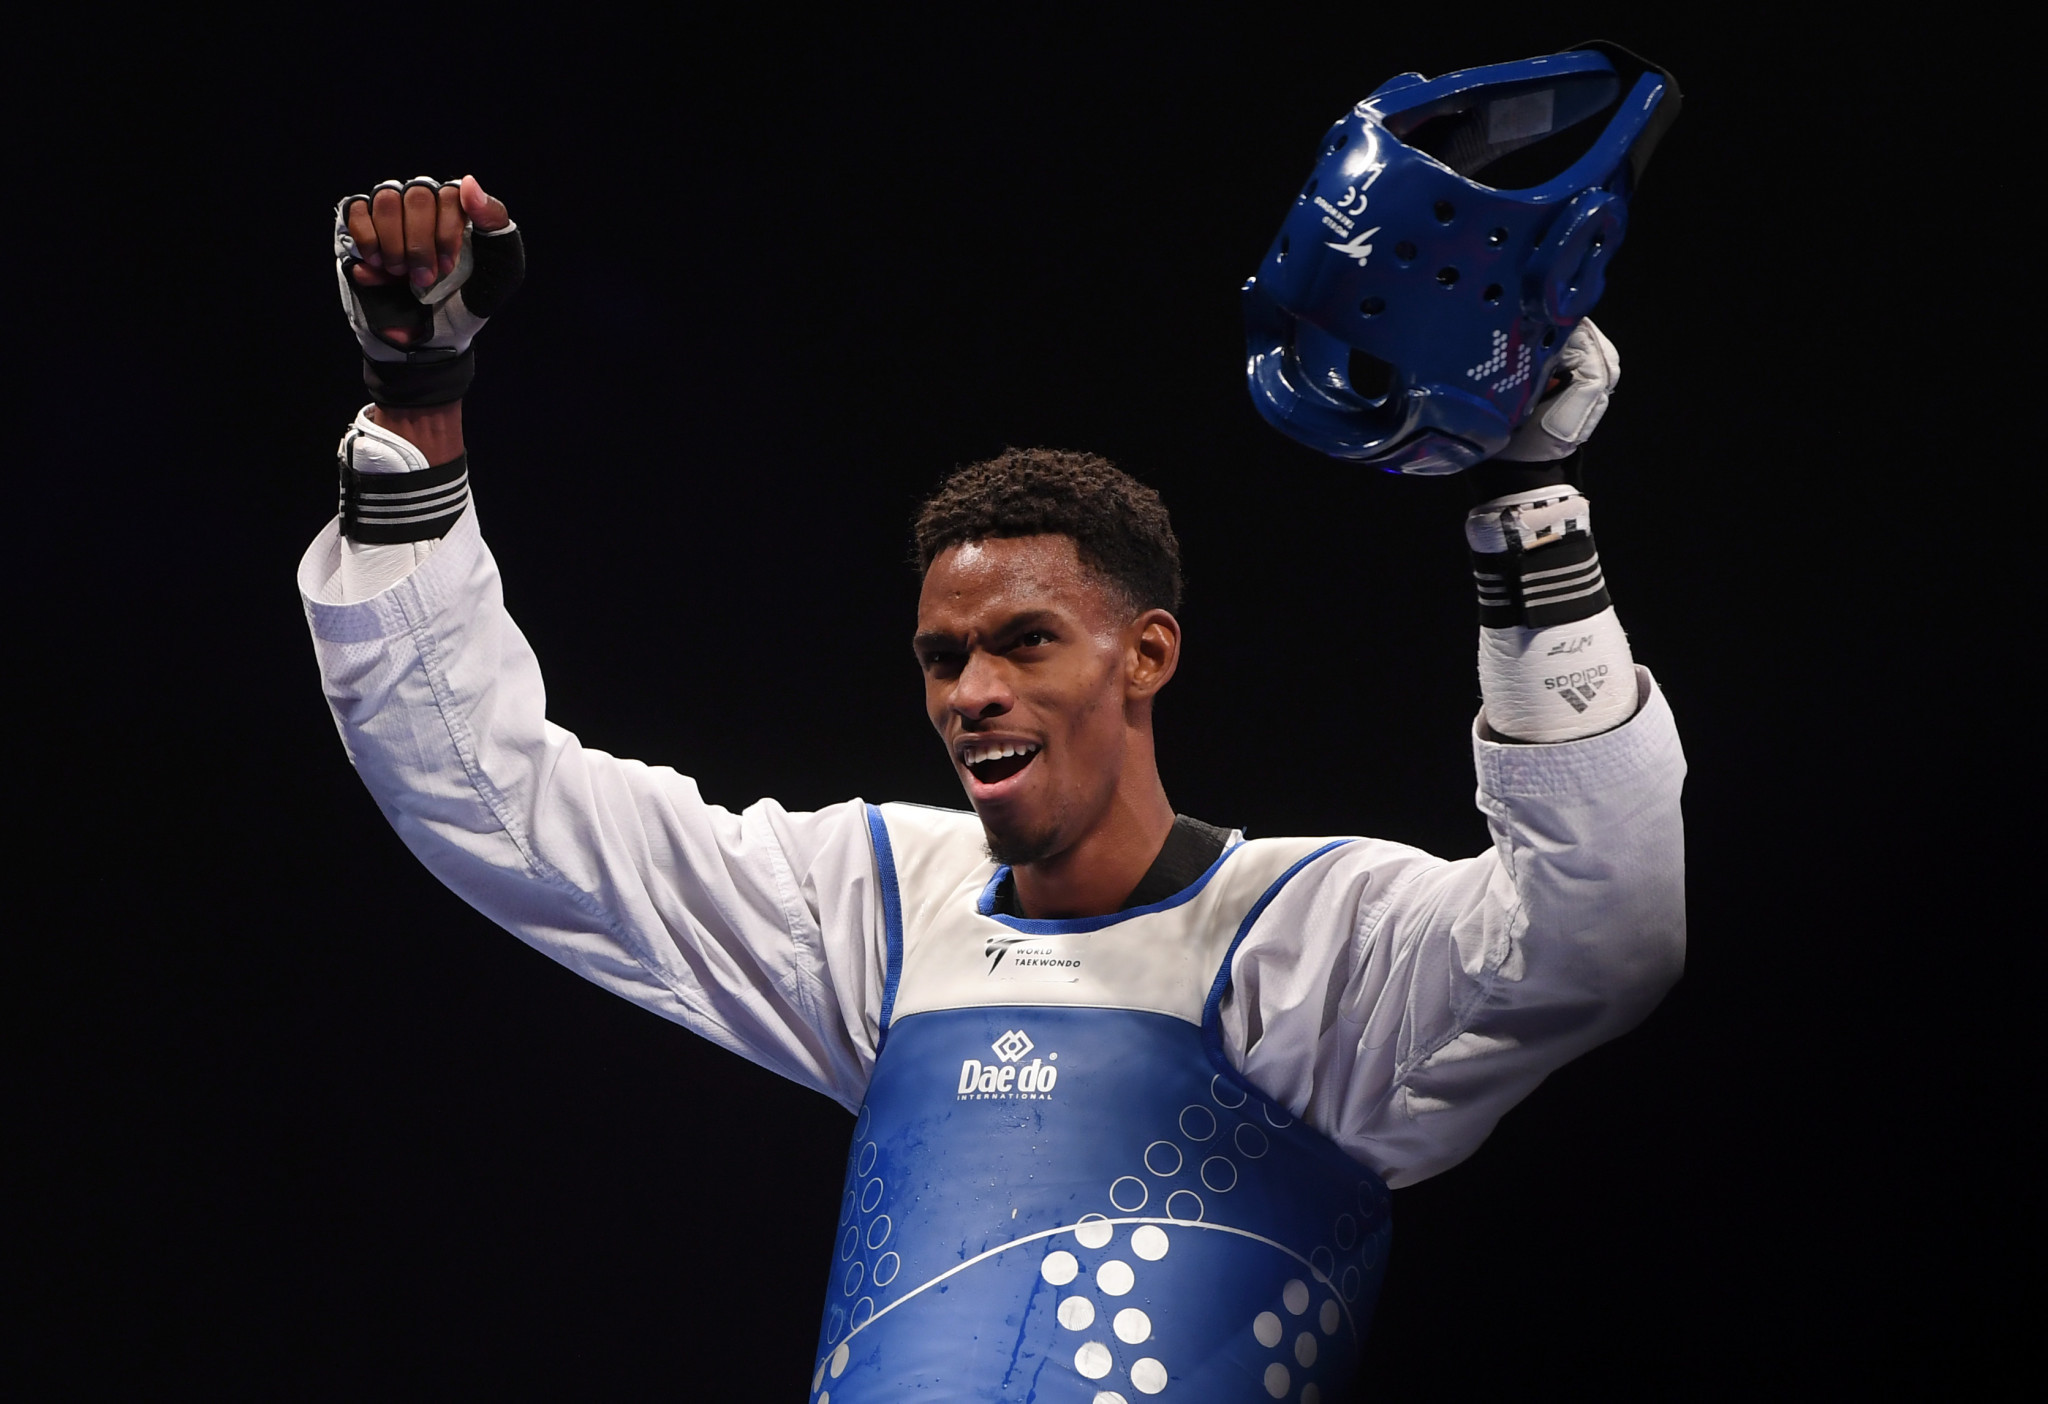 Rafael Alba booked his place at Tokyo 2020 on day one of the Pan American Taekwondo Olympic Qualification Tournament in Costa Rica ©Getty Images